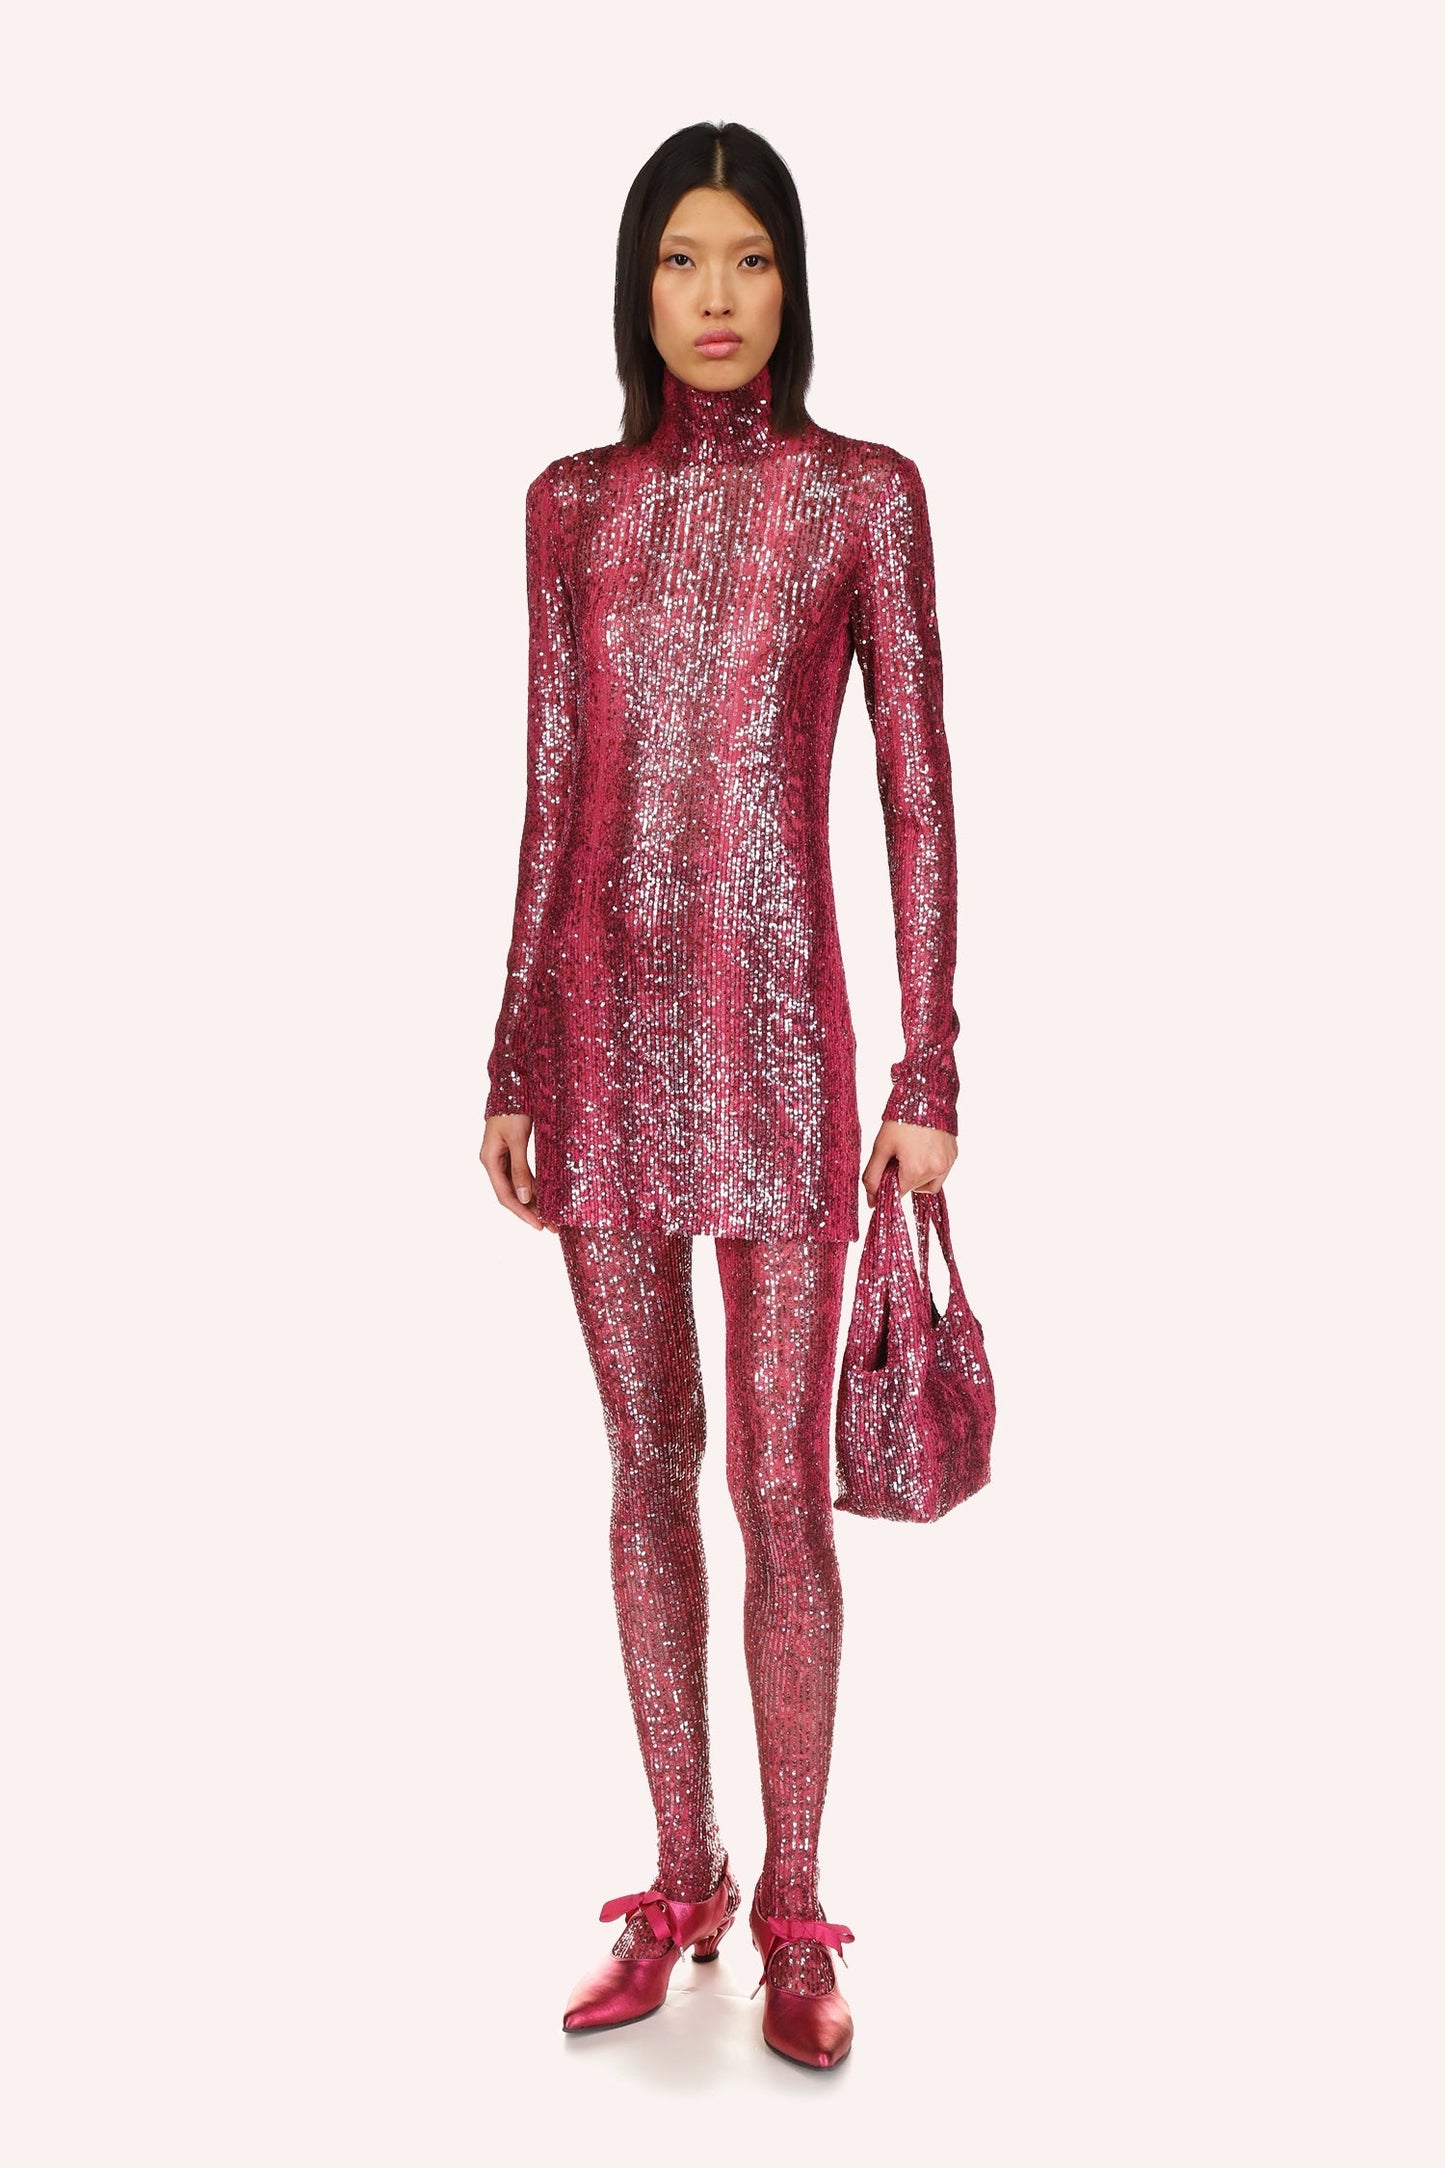 The Snakeskin Sequin Turtleneck Dress Ruby Multi is mini, shiny ruby red color, long sleeves